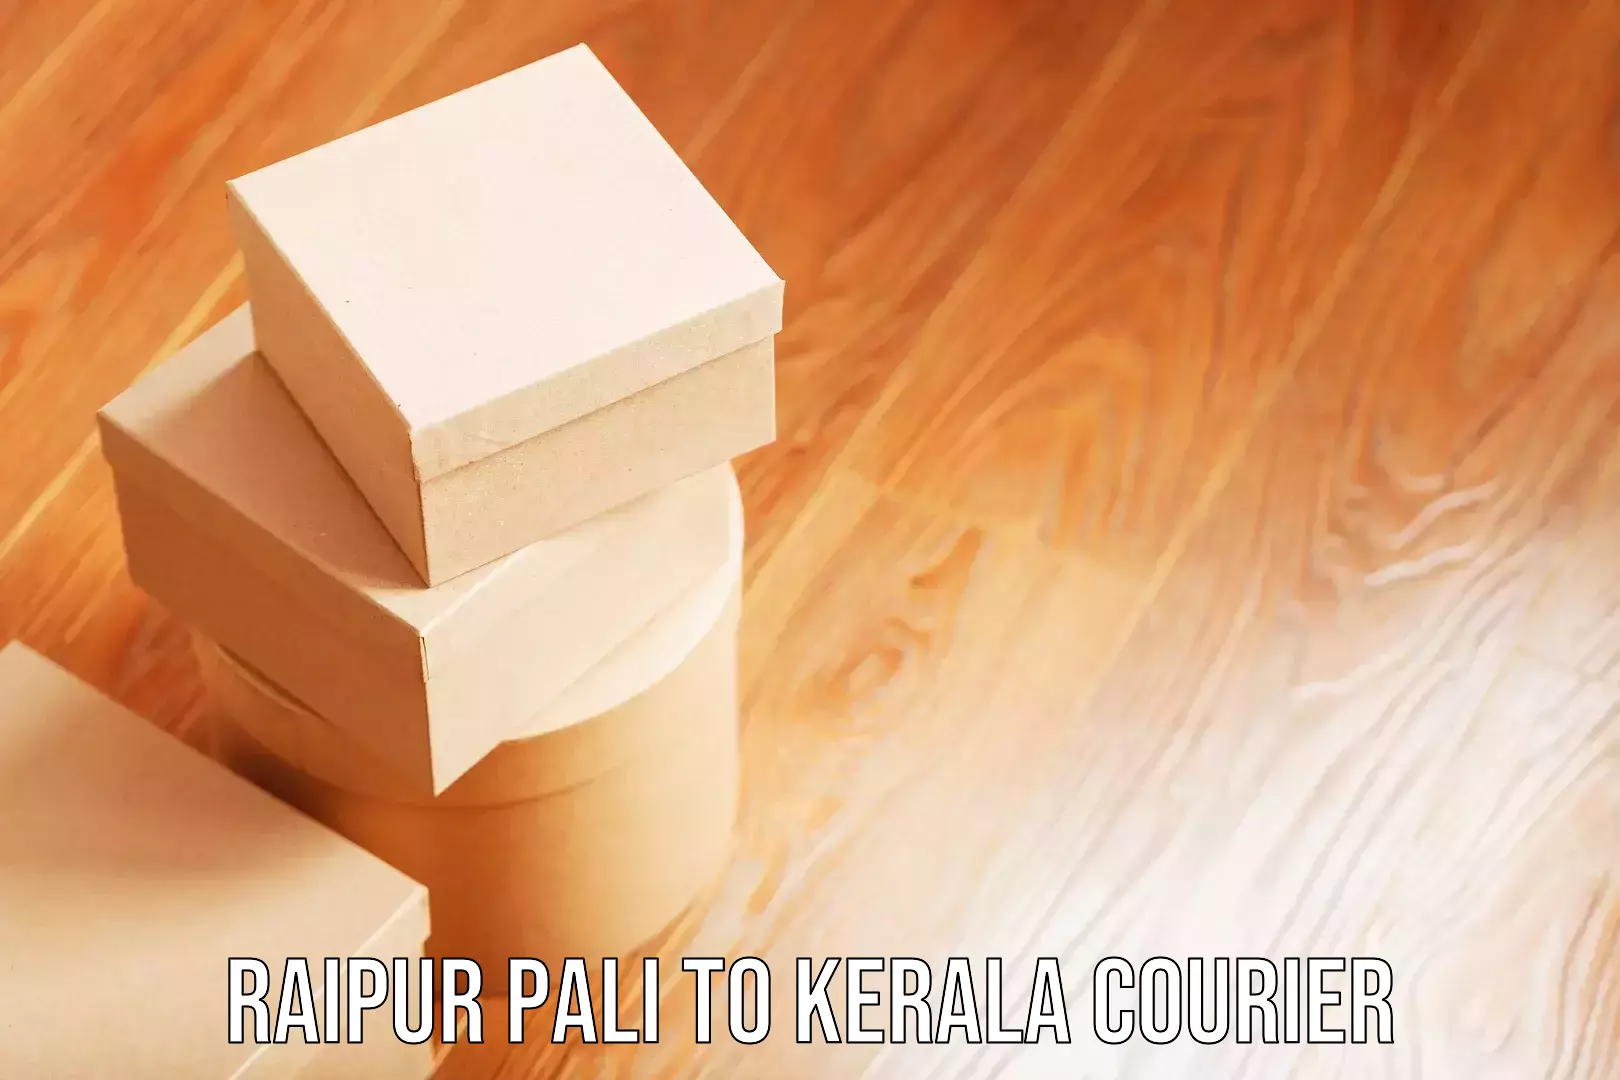 Luggage transport consultancy Raipur Pali to Nallepilly